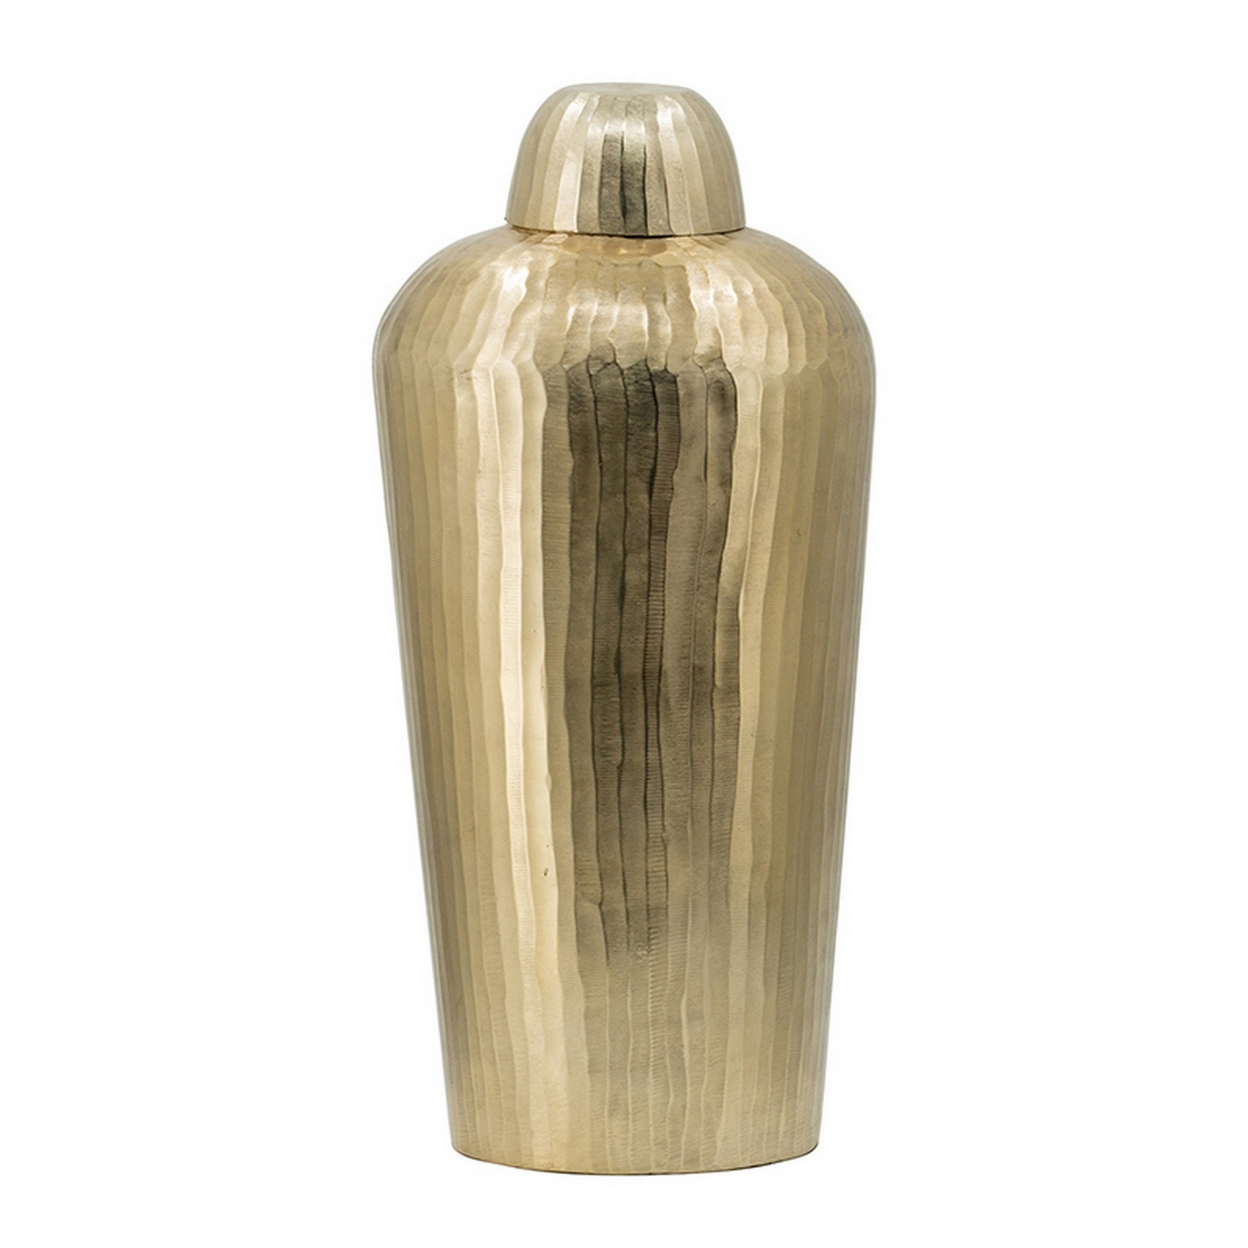 22 Inch Lidded Vase Jar, Tall Curved Silhouette, Hammered Texture, Gold- Saltoro Sherpi